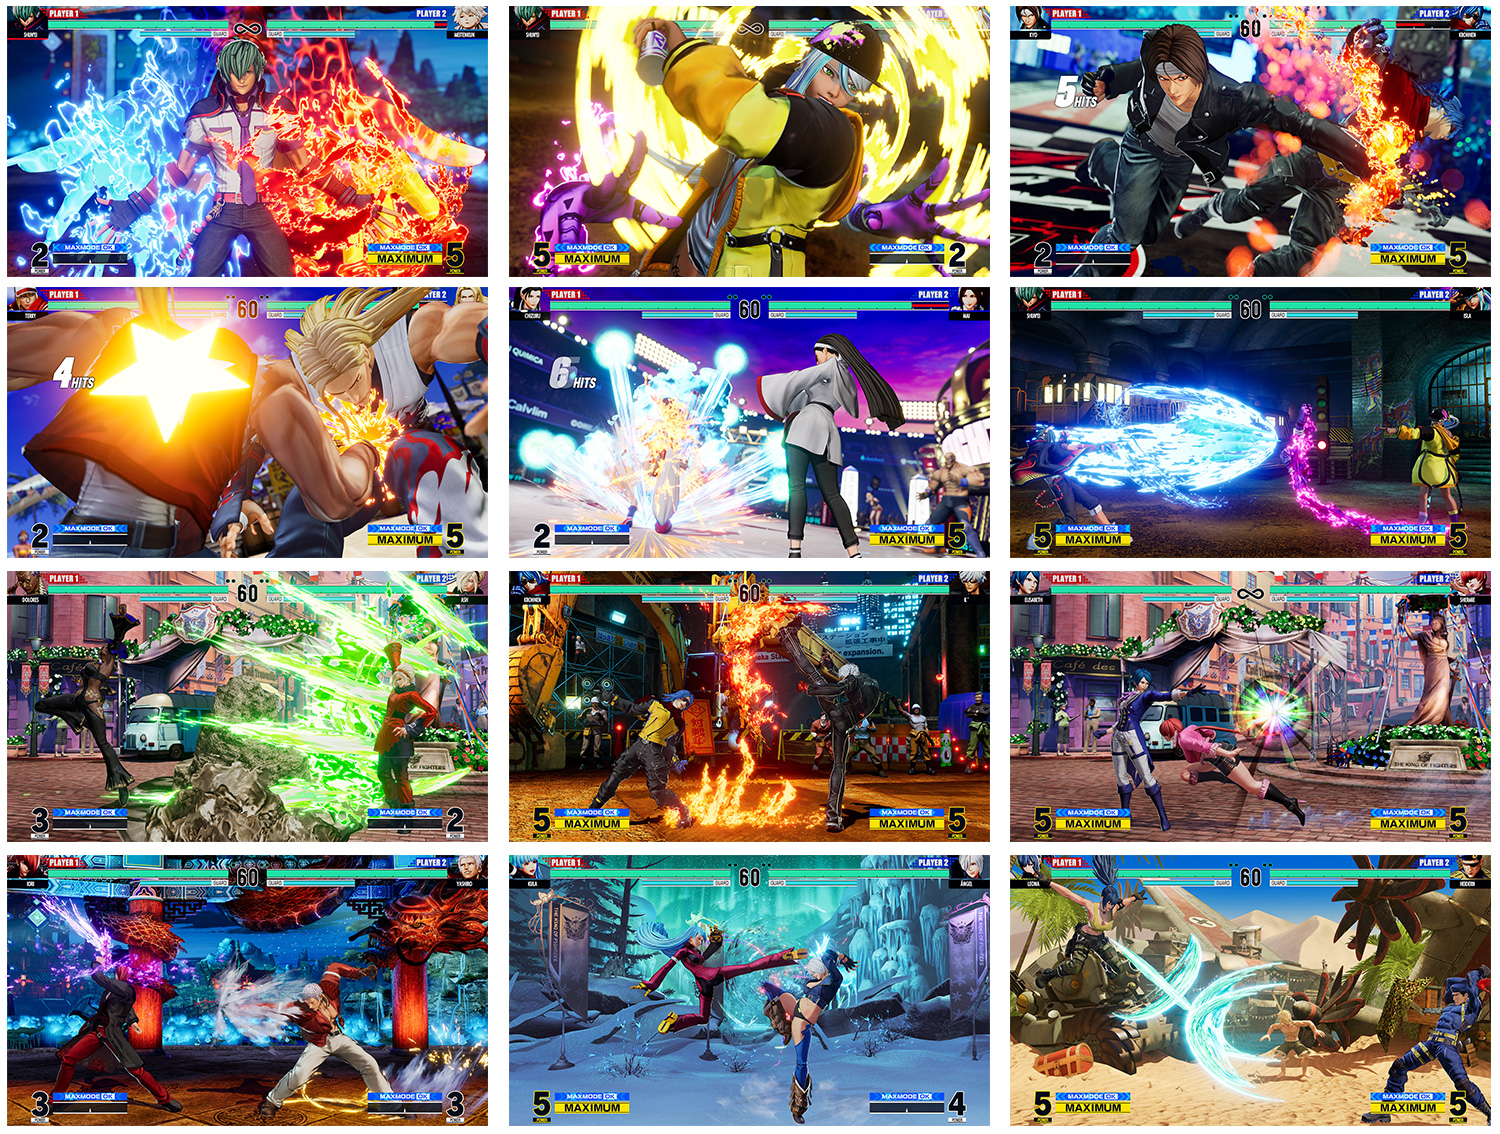 THE KING OF FIGHTERS XV - DLC Team Pass Team Pass 2 on Steam